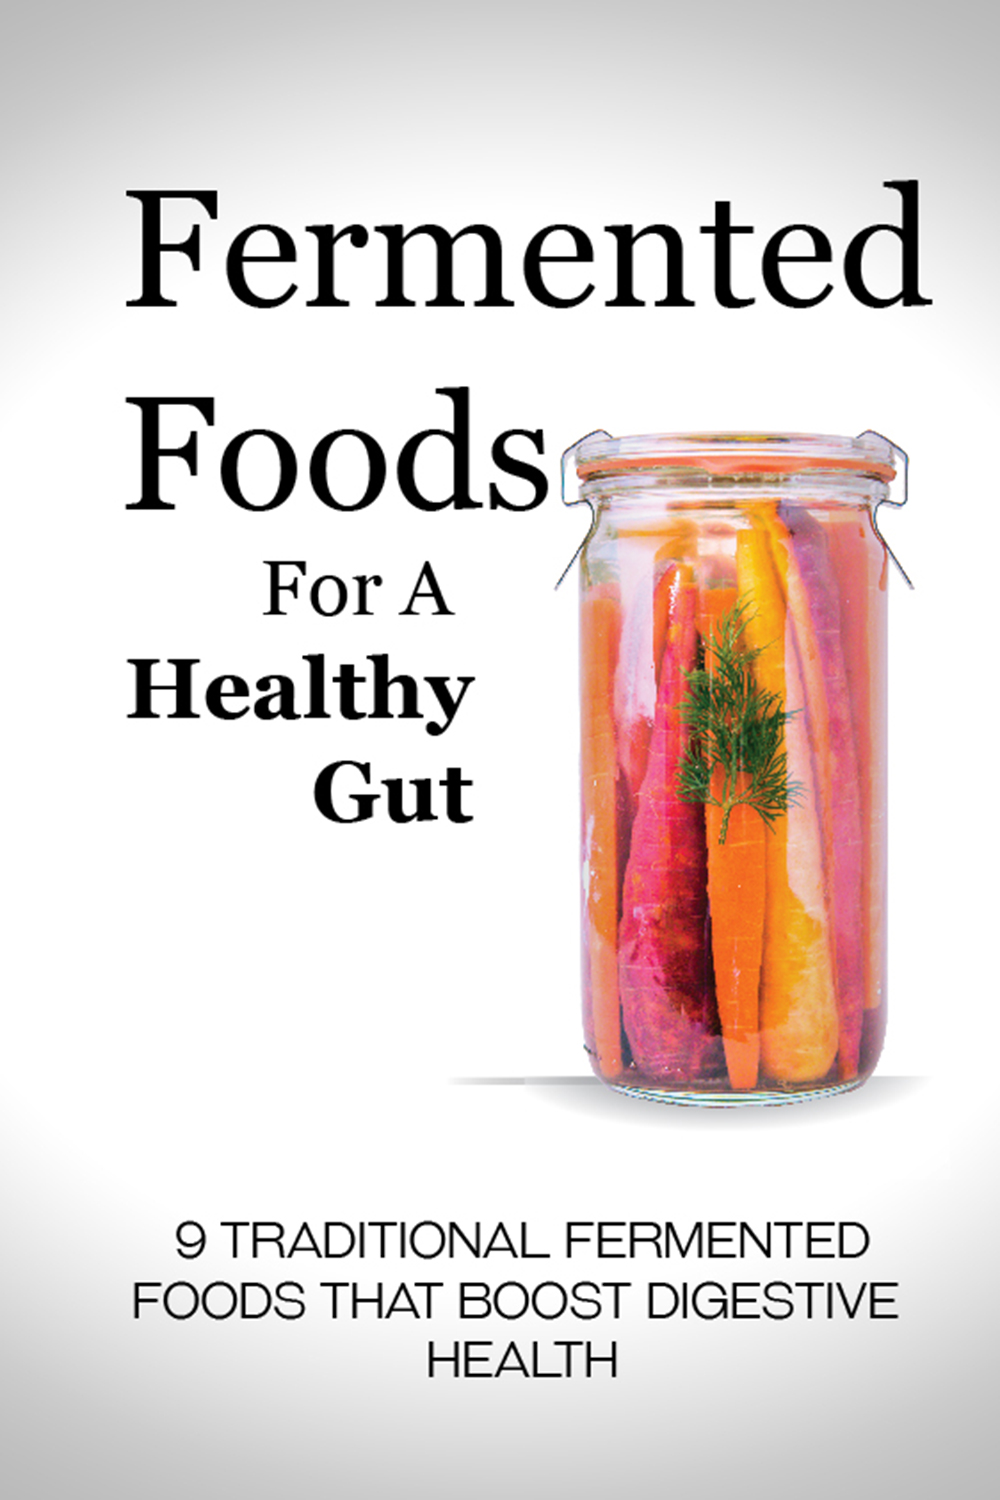 FREE: Fermented Foods for a Healthy Gut: Nine Traditional Fermented Foods that Boost Digestive Health by Alison Jones